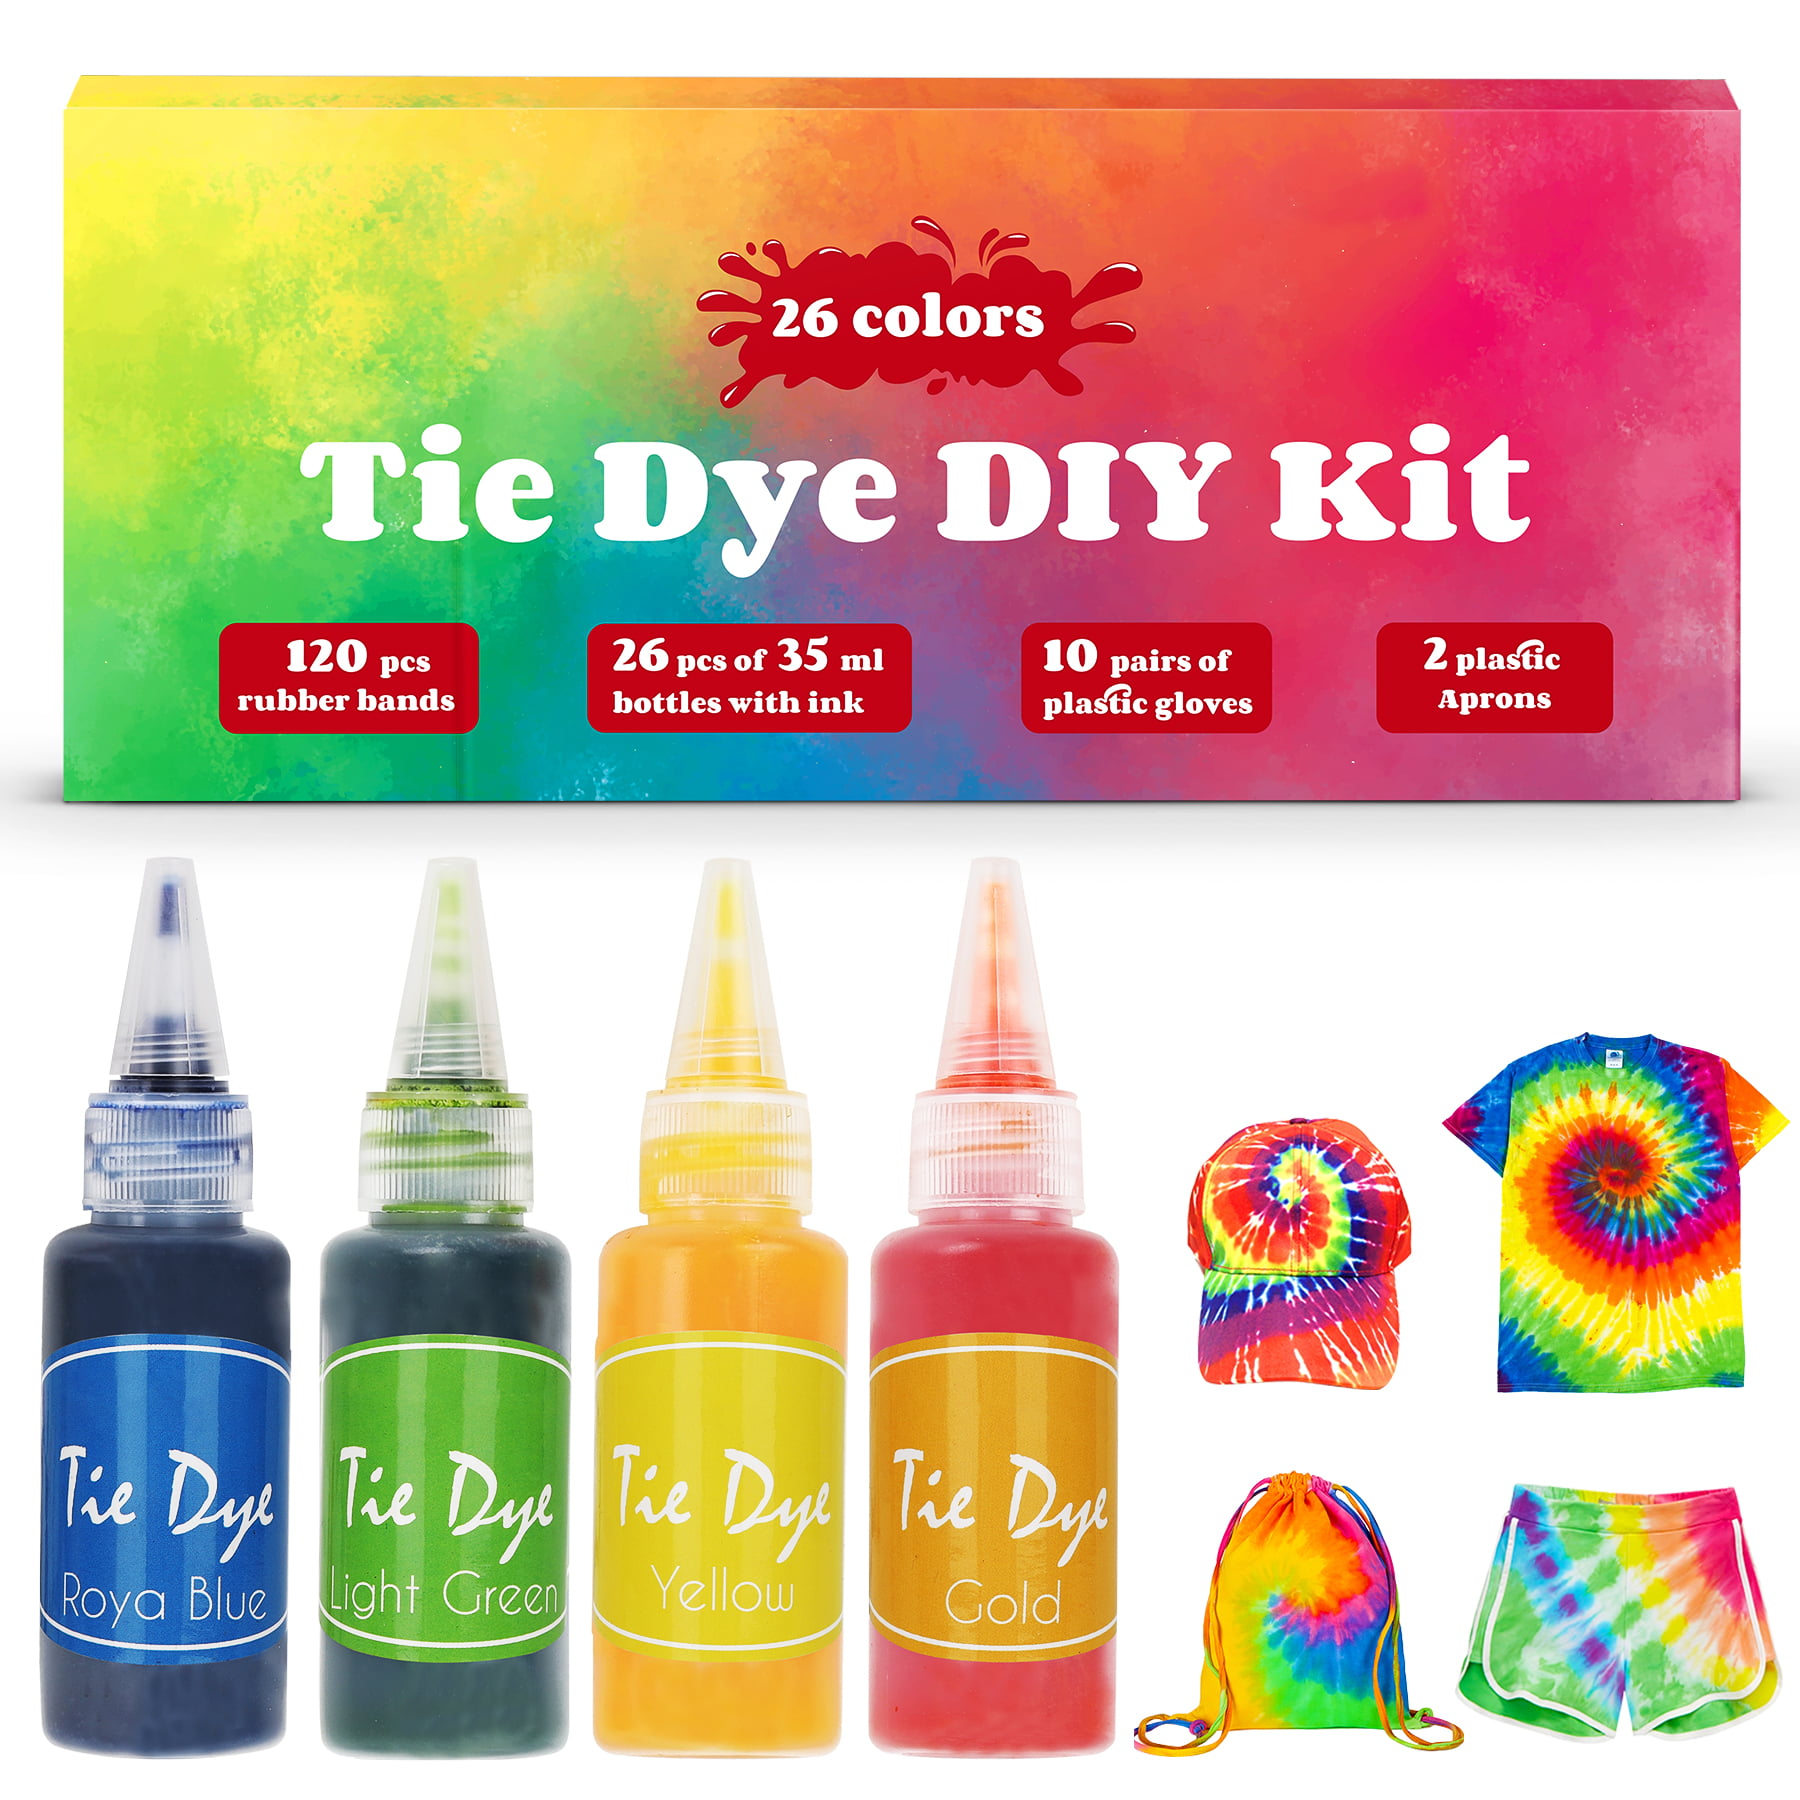 Mosaiz Tie Dye Kit of 26 Colors, Spray Tie Dye for Creative Activities and  DIY for Kids and Adults, Fabric Dyeing Set, Fun Summer Activity Outdoor 26  Colors with Spray Nozzles